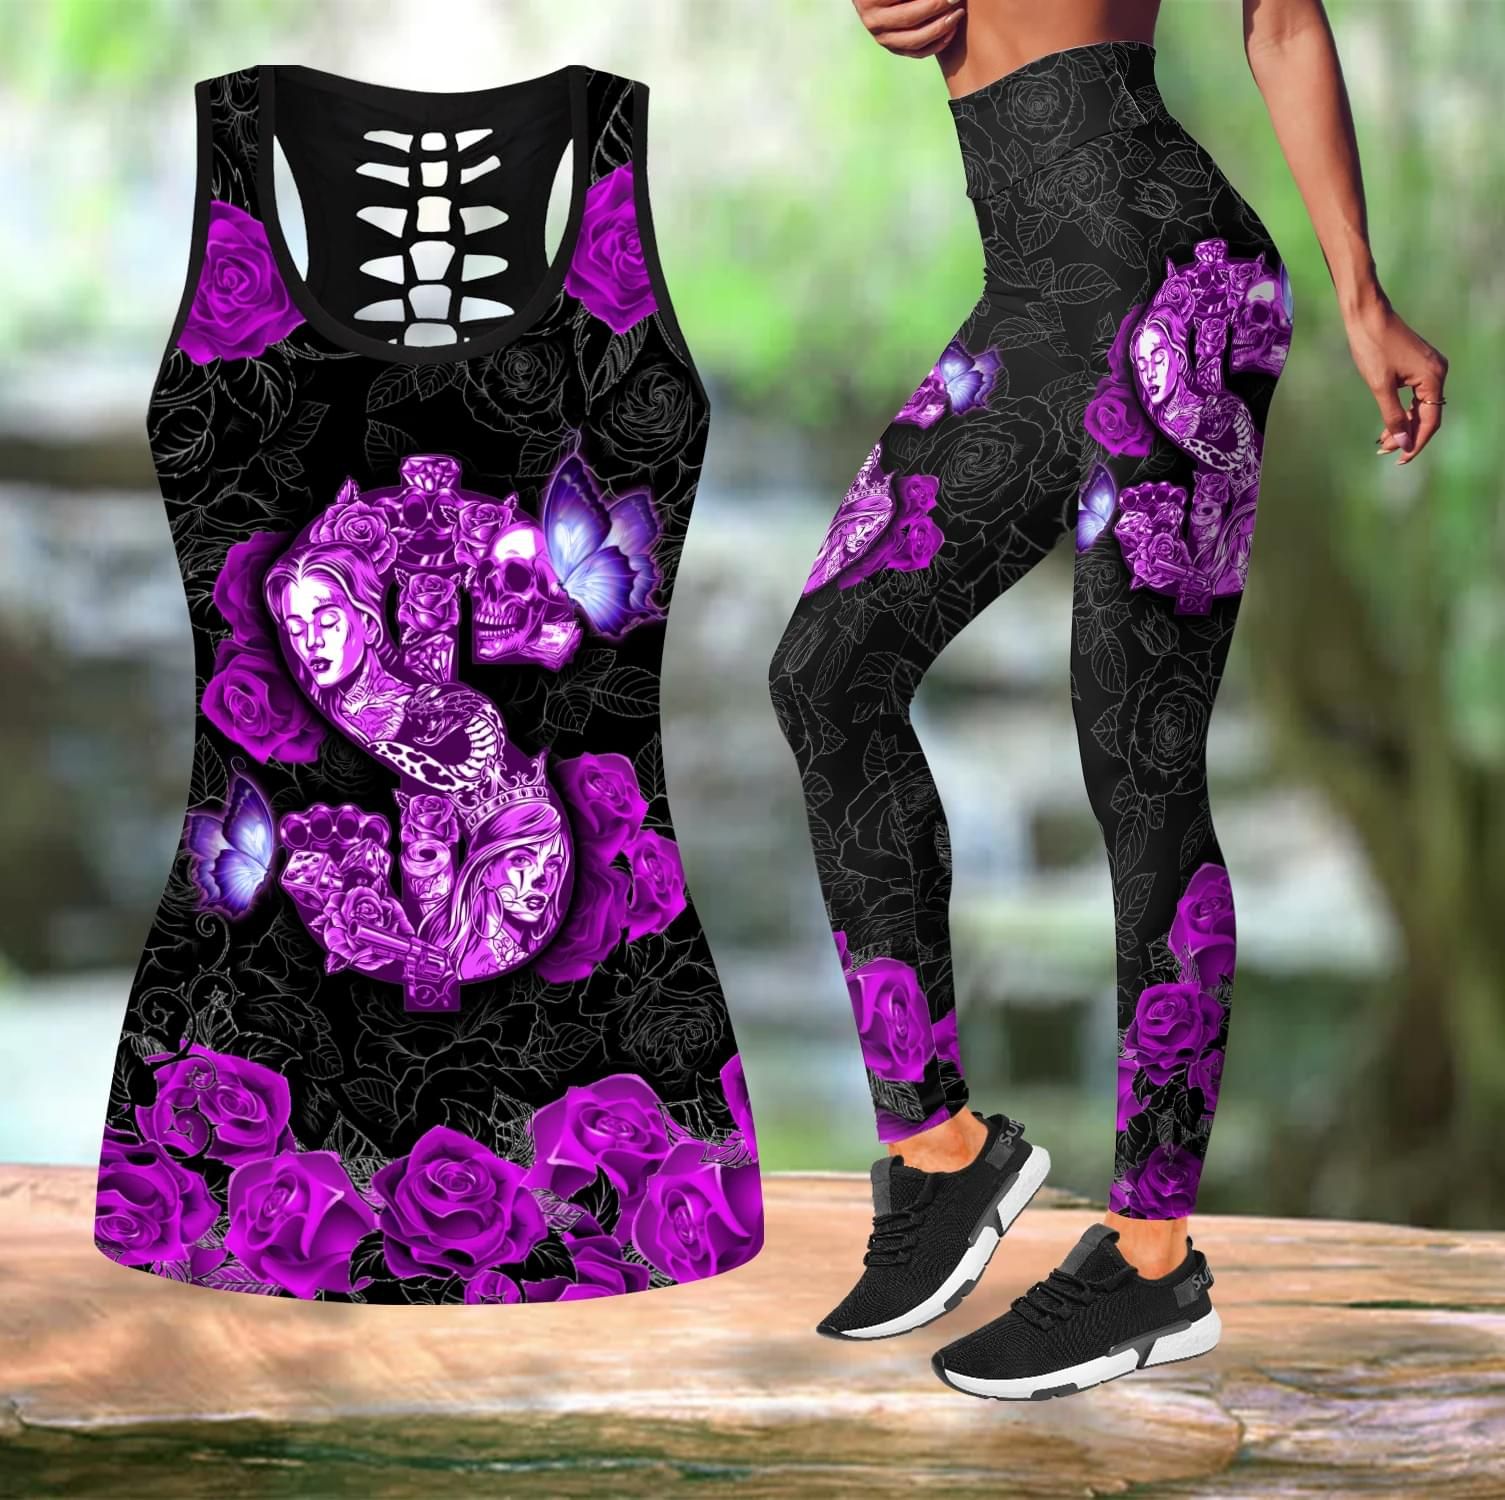 Money Rose Butterfly Tank Top And Leggings